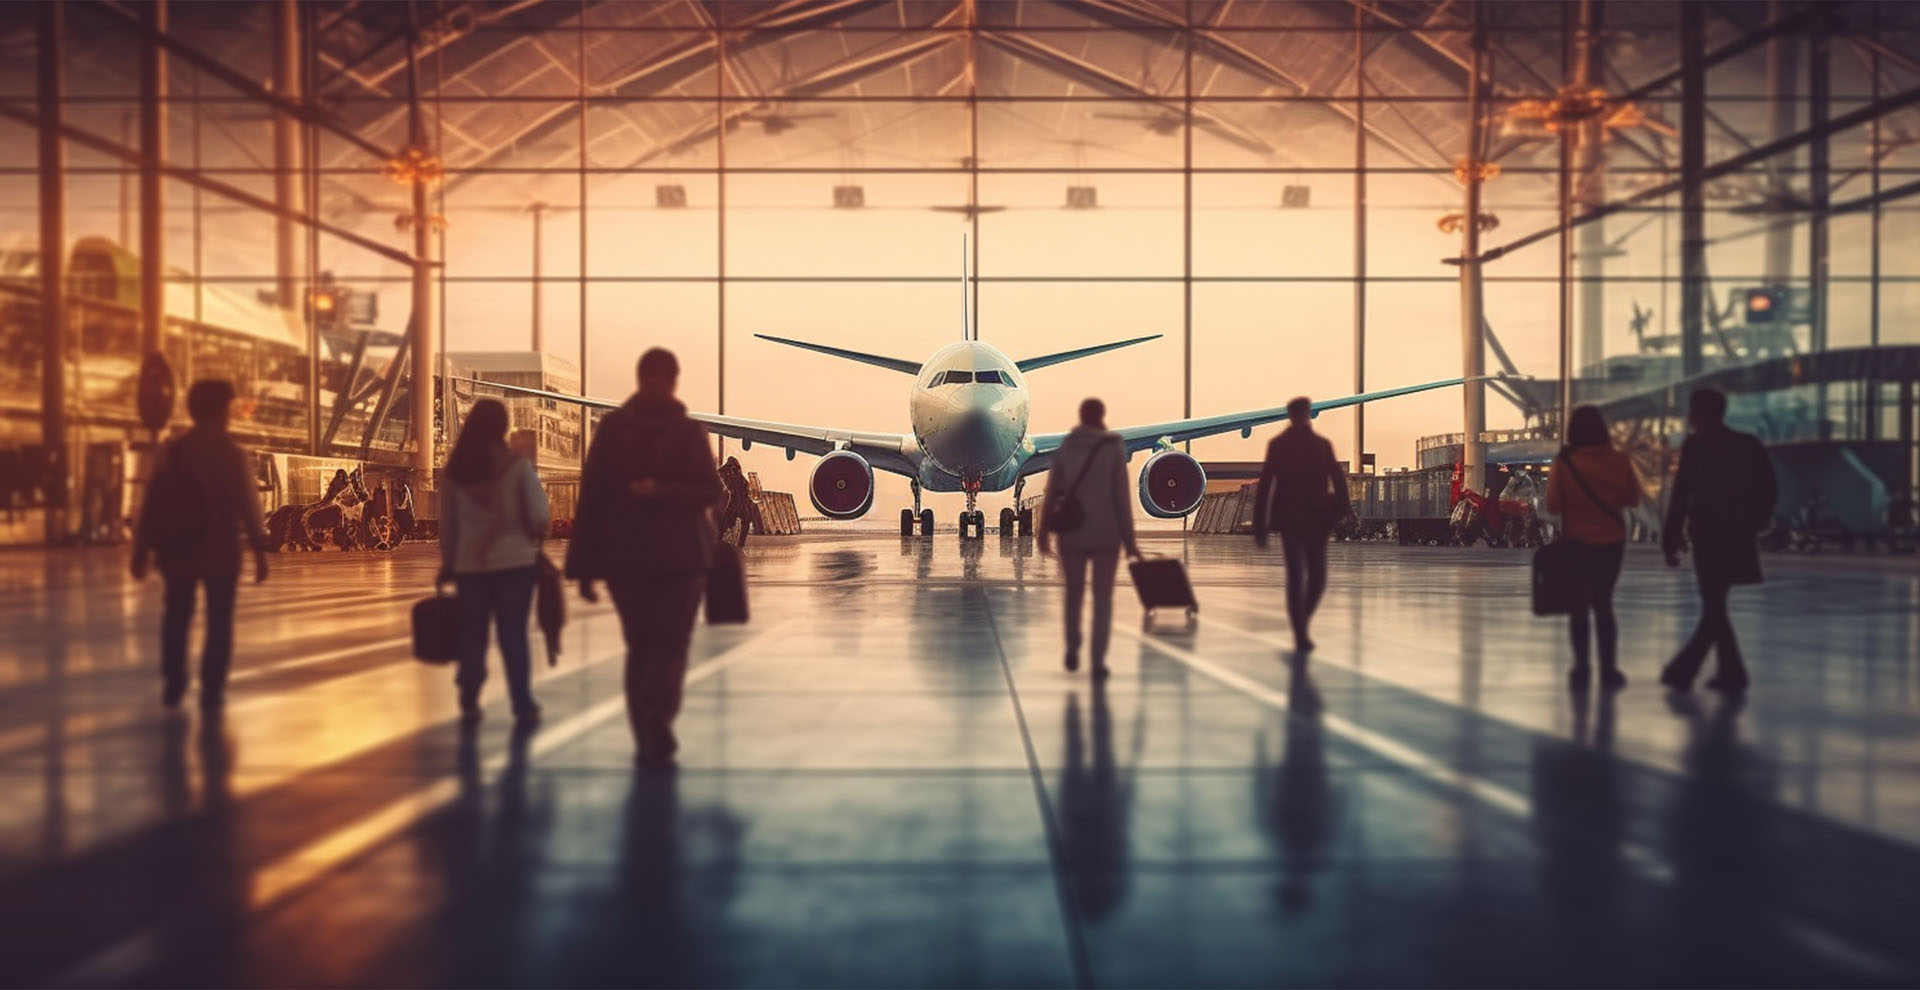 Experience unparalleled safety with JDA Aviation's advanced solutions for airport terminal security. Ensure compliance, reduce risks, and enhance passenger trust. Contact us for expertise in aviation security protocols.